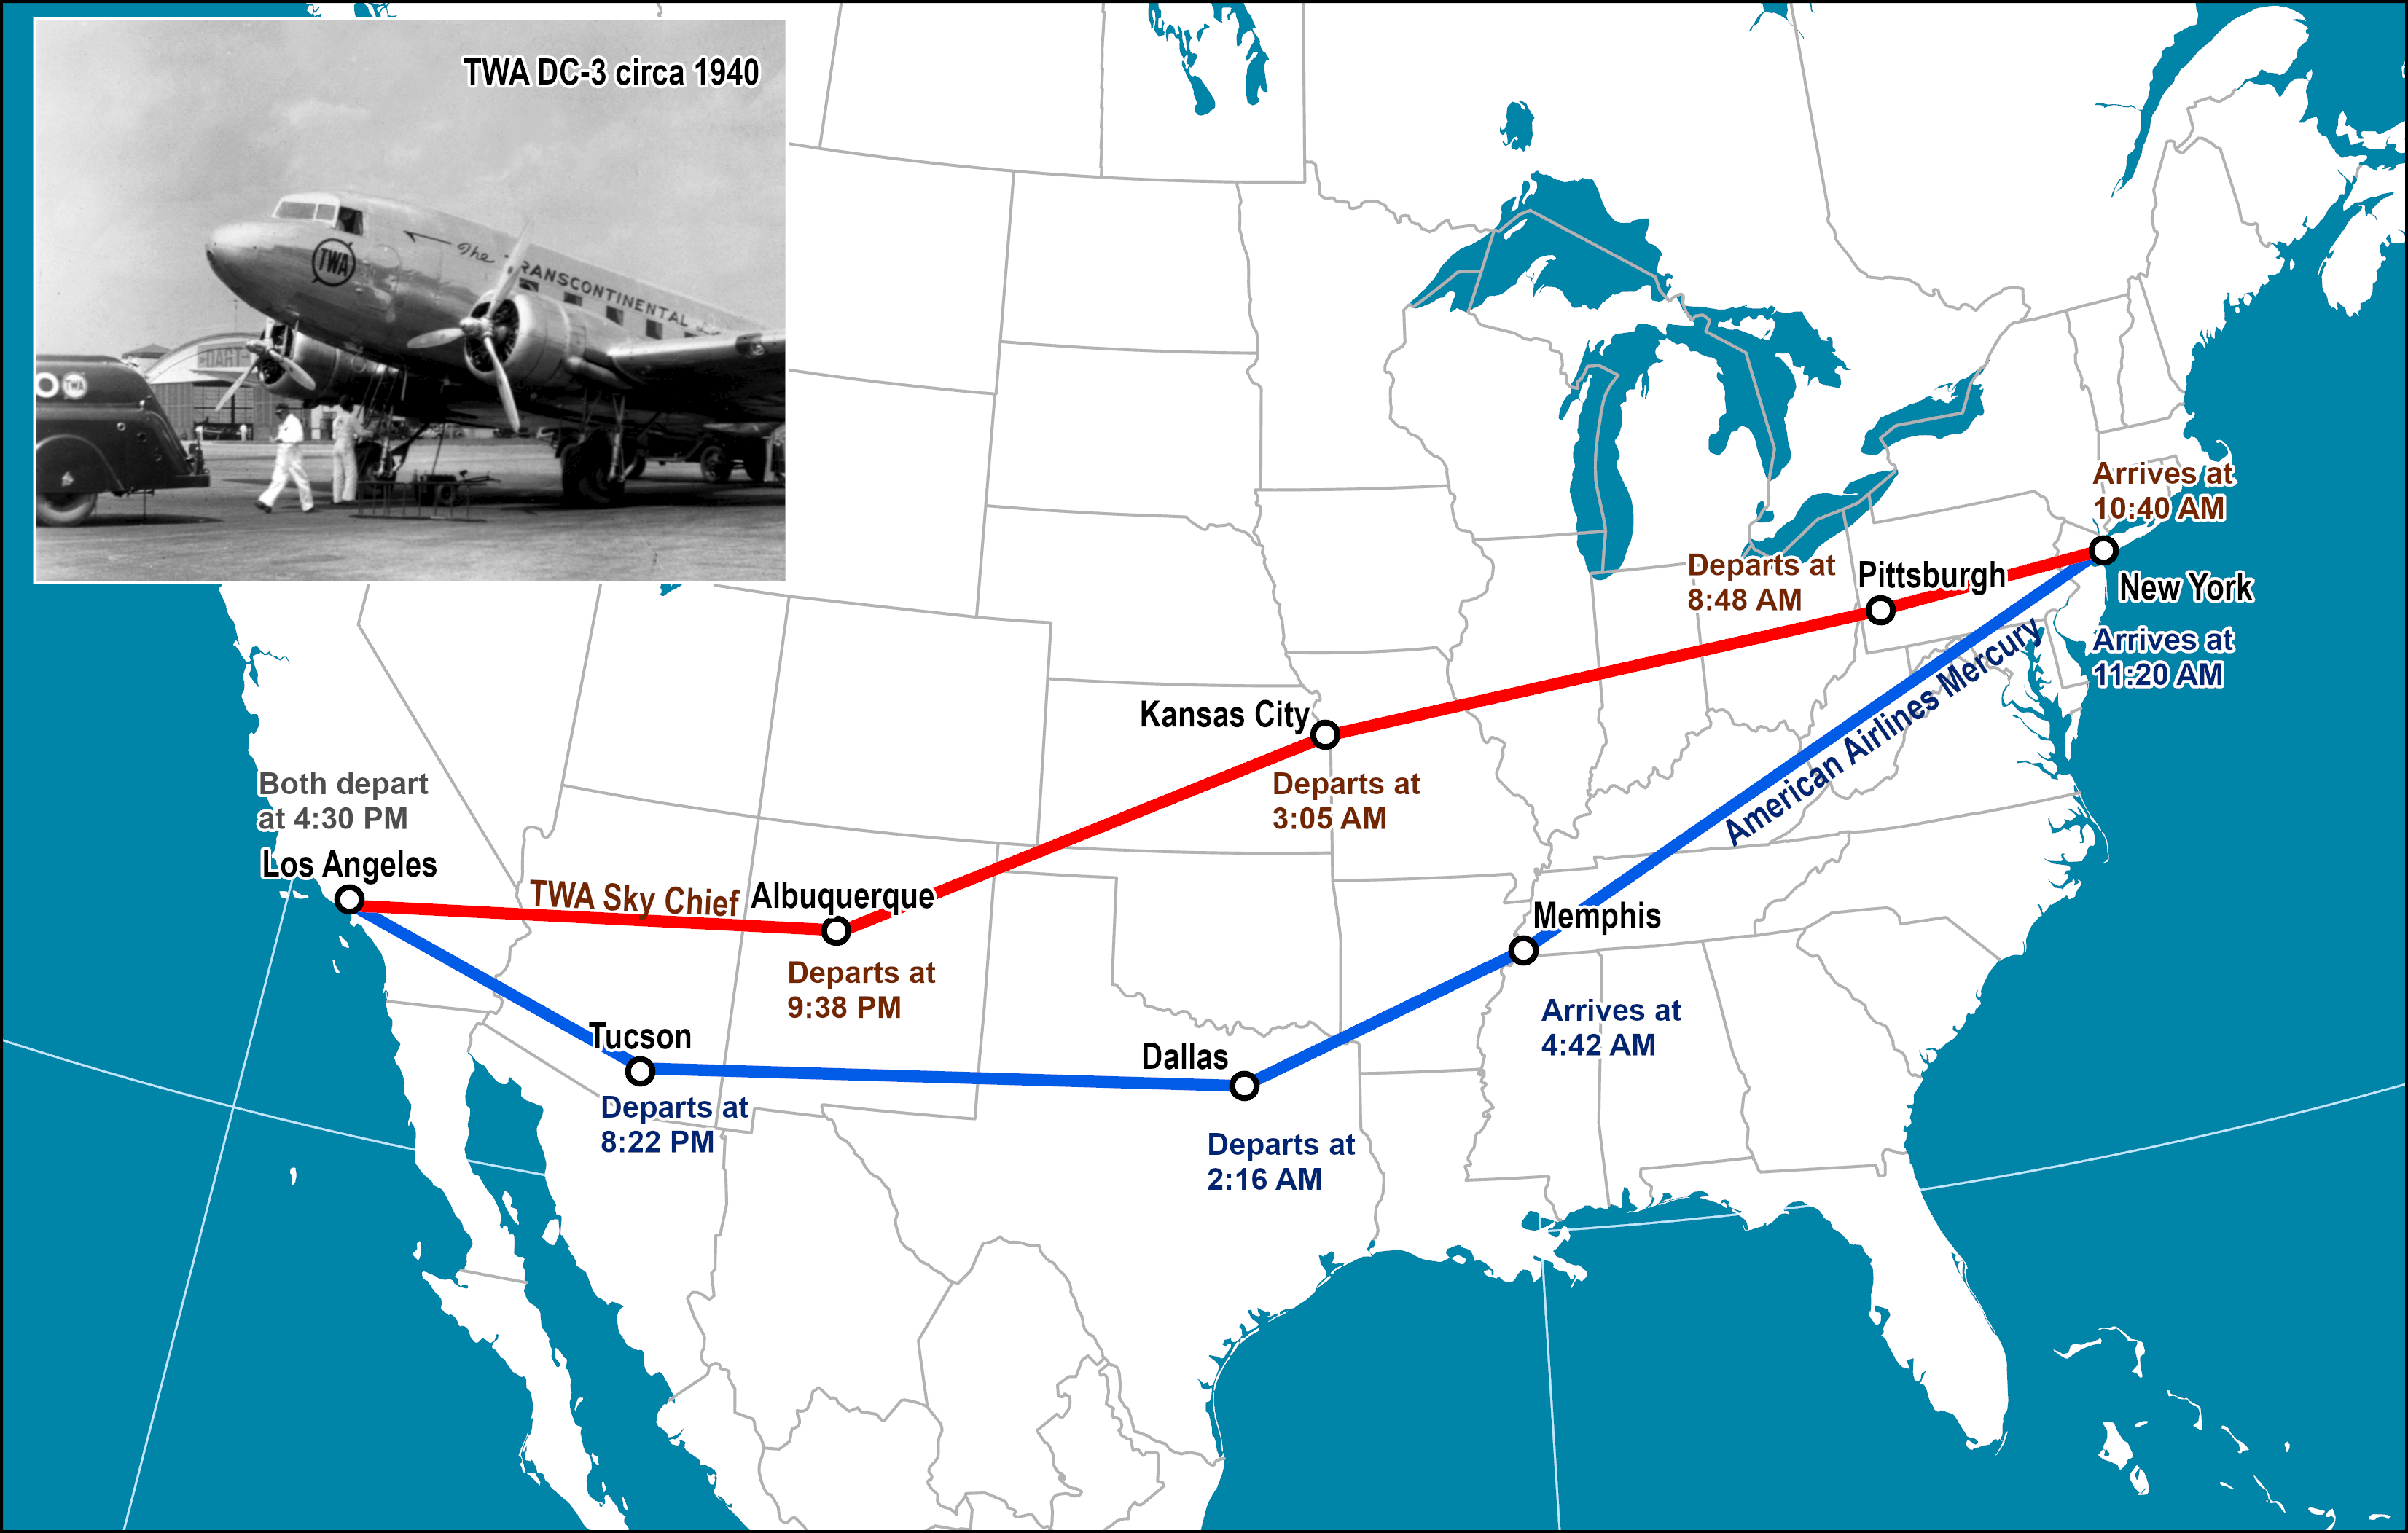 Selected Transcontinental DC-3 Routes, Late 1930s